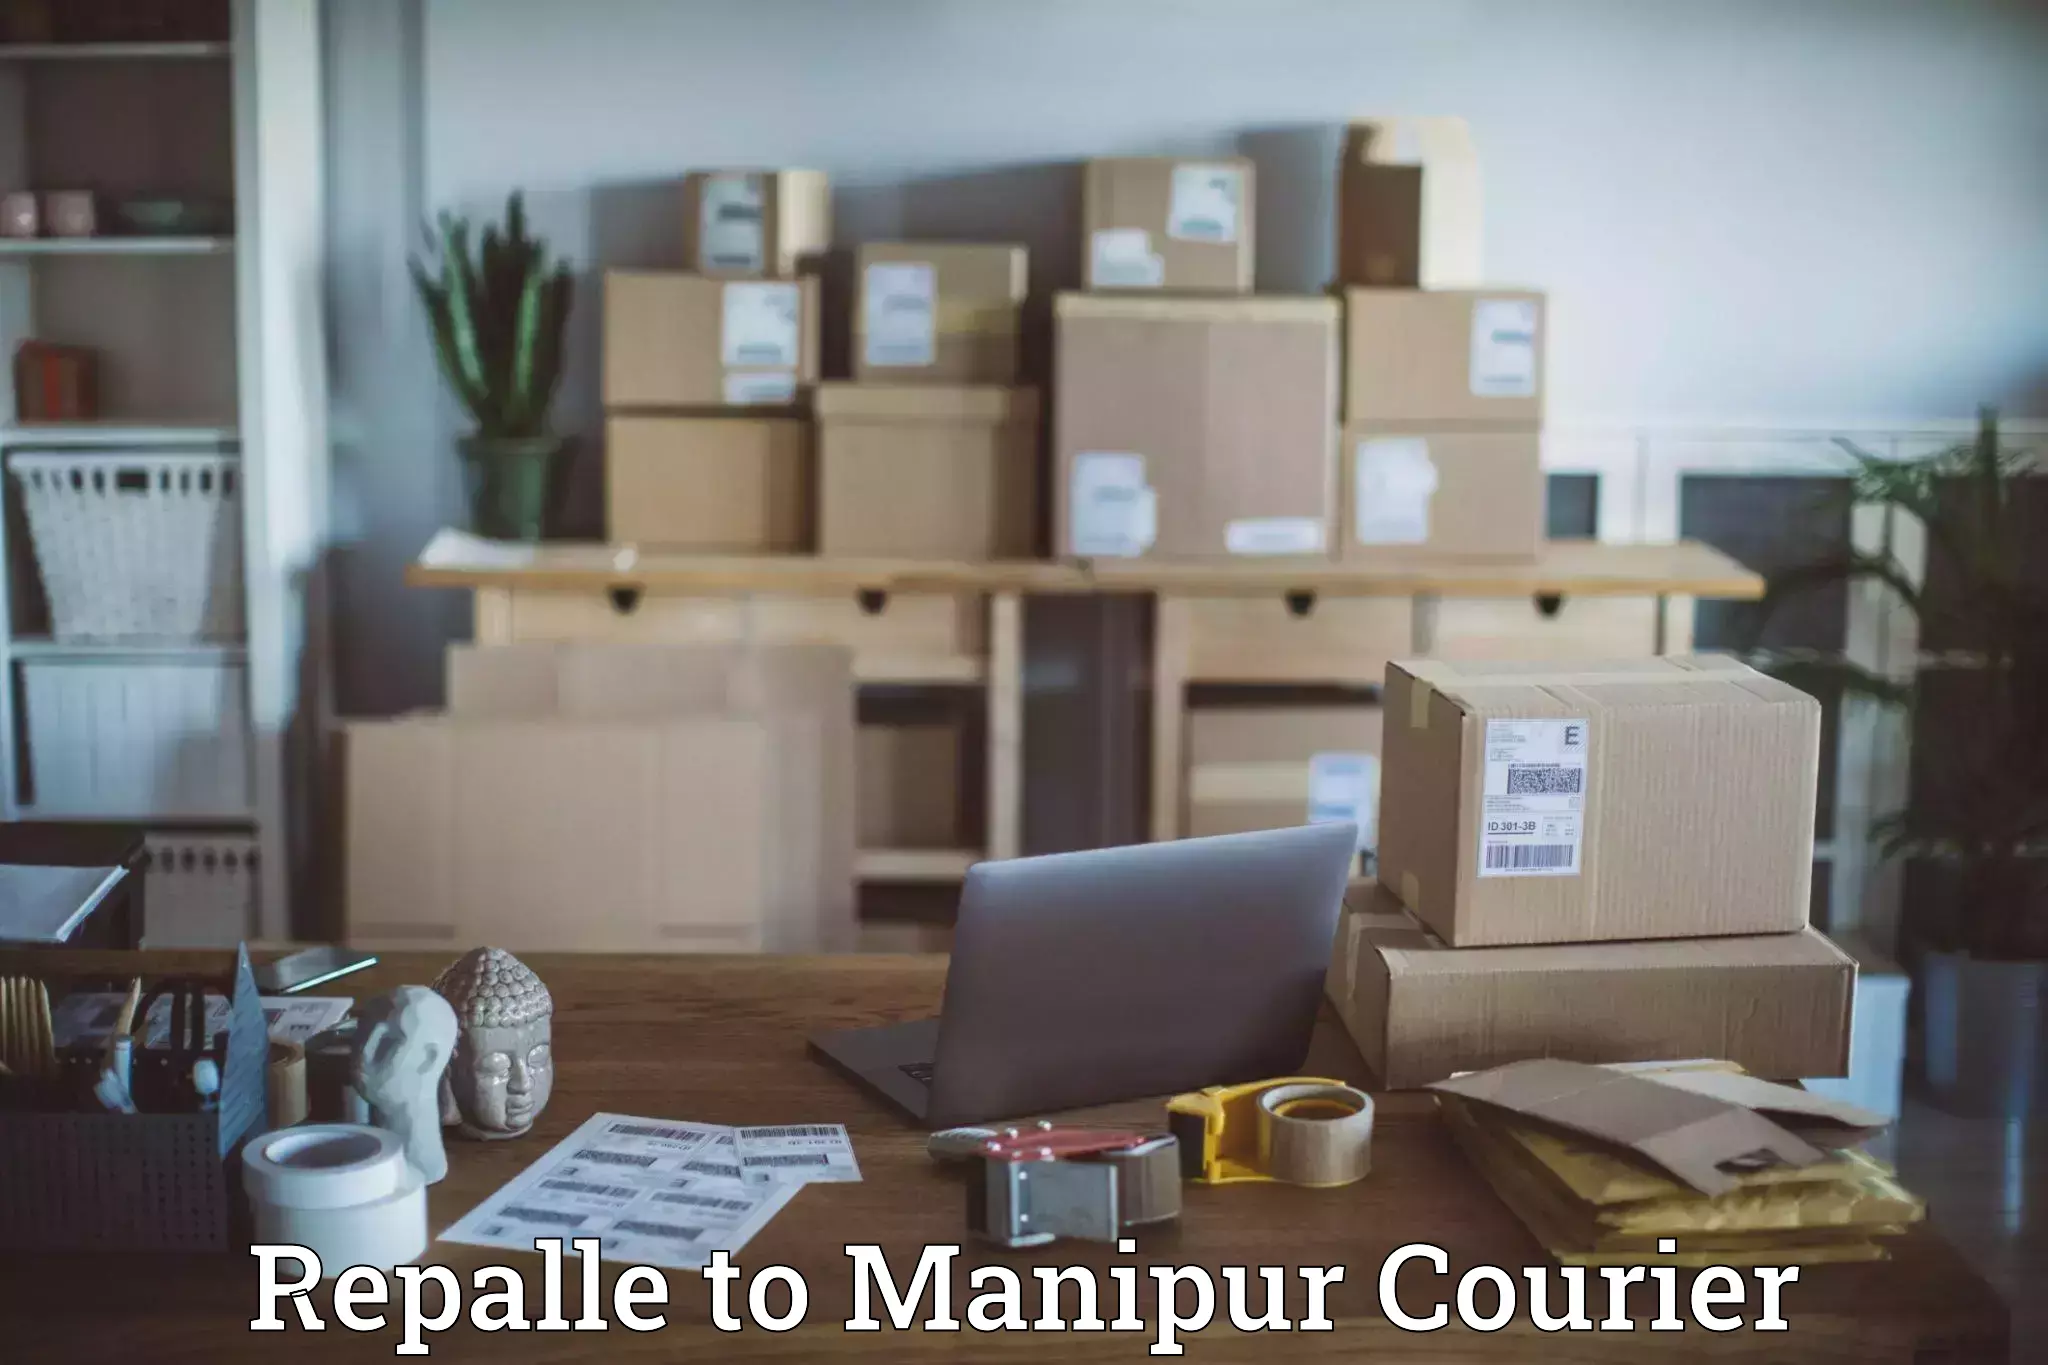 On-call courier service Repalle to Manipur